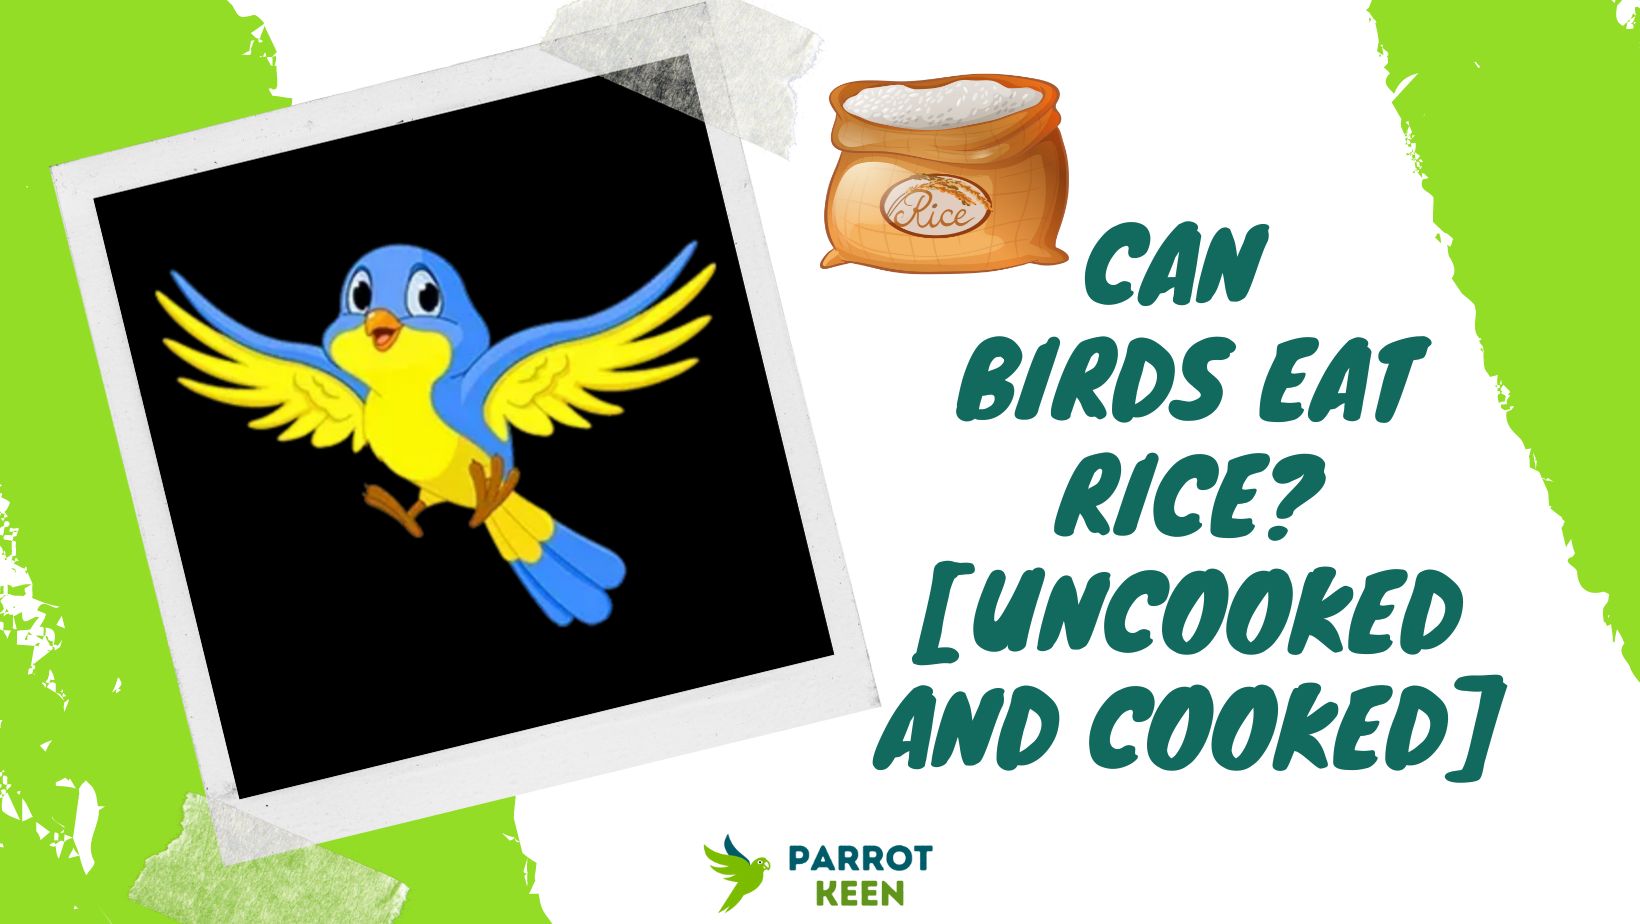 Can Birds Eat Rice? [Uncooked and Cooked]